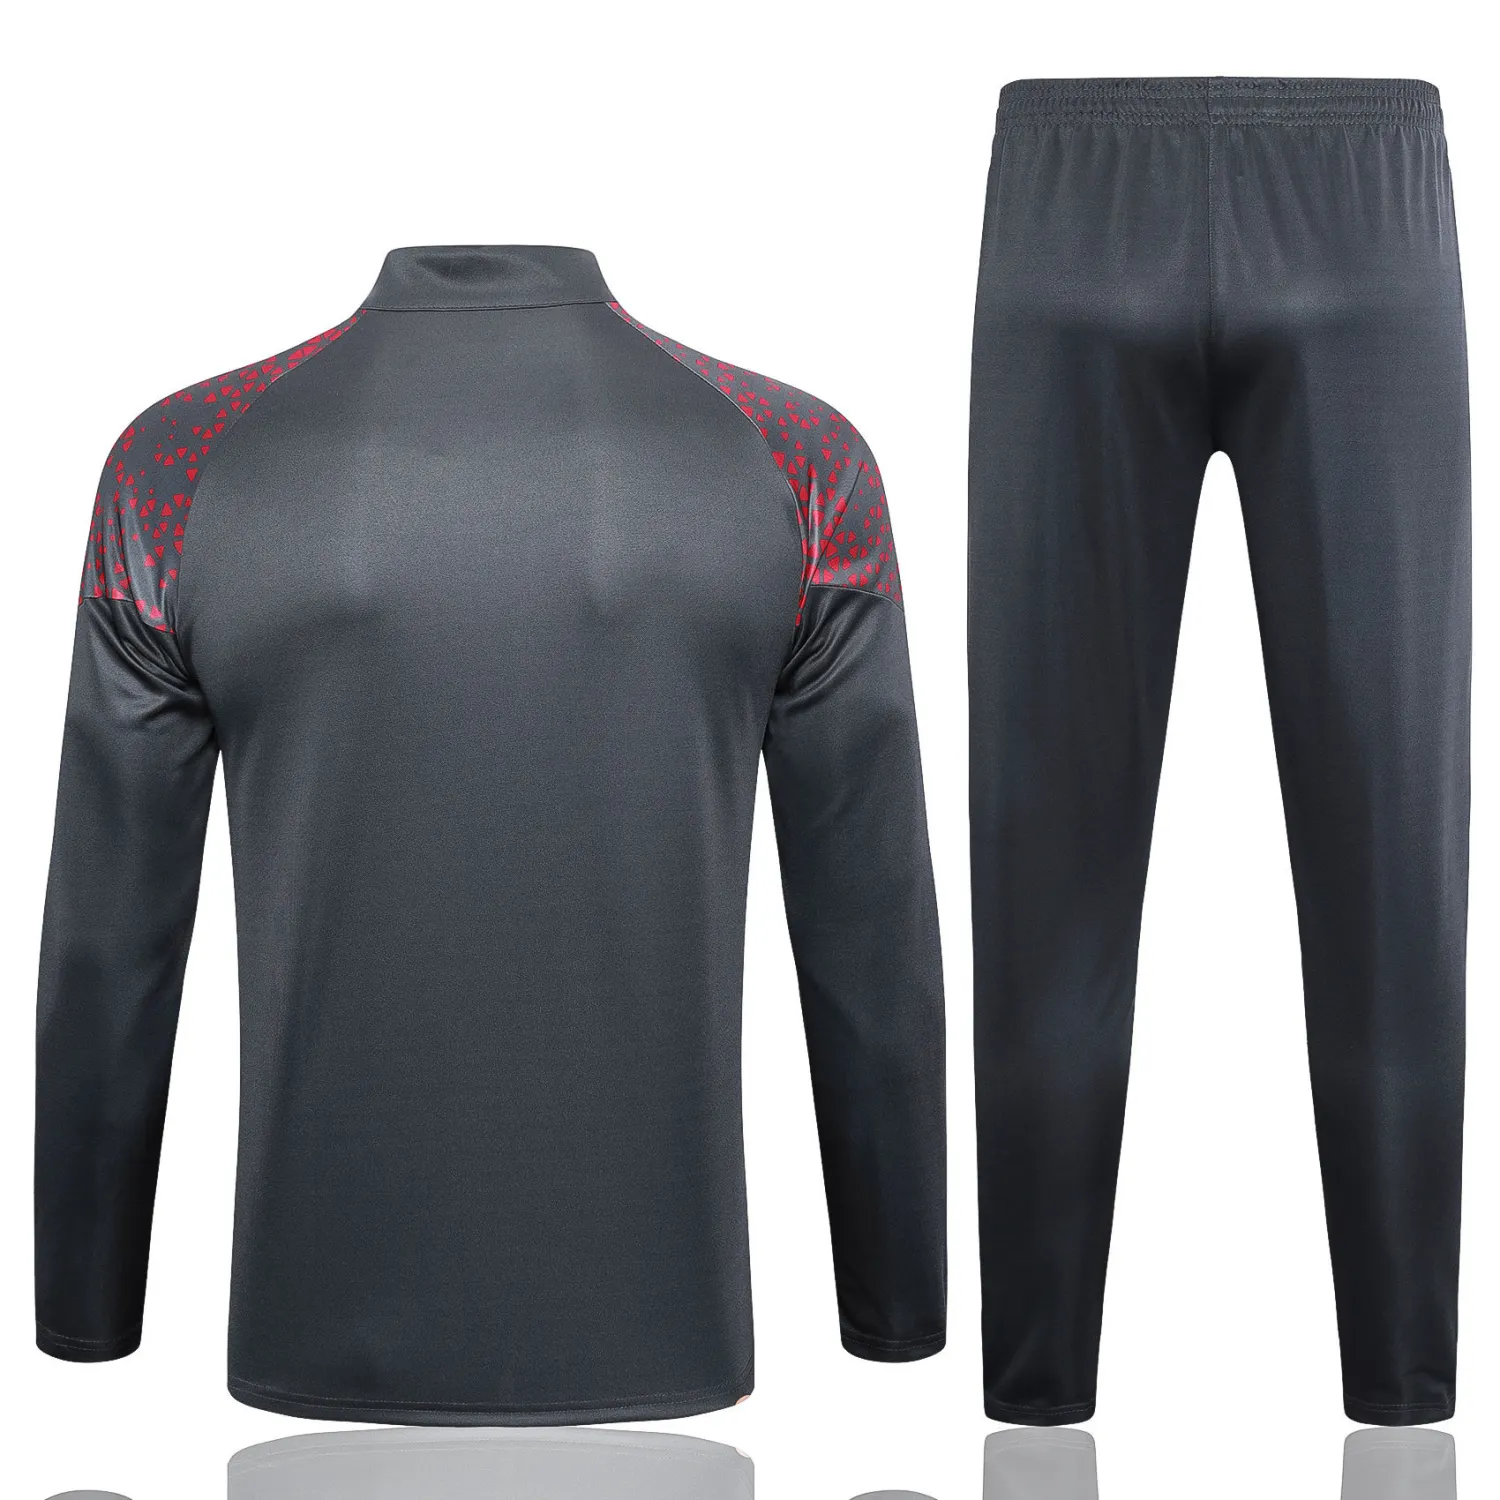 manchester city black red training suit